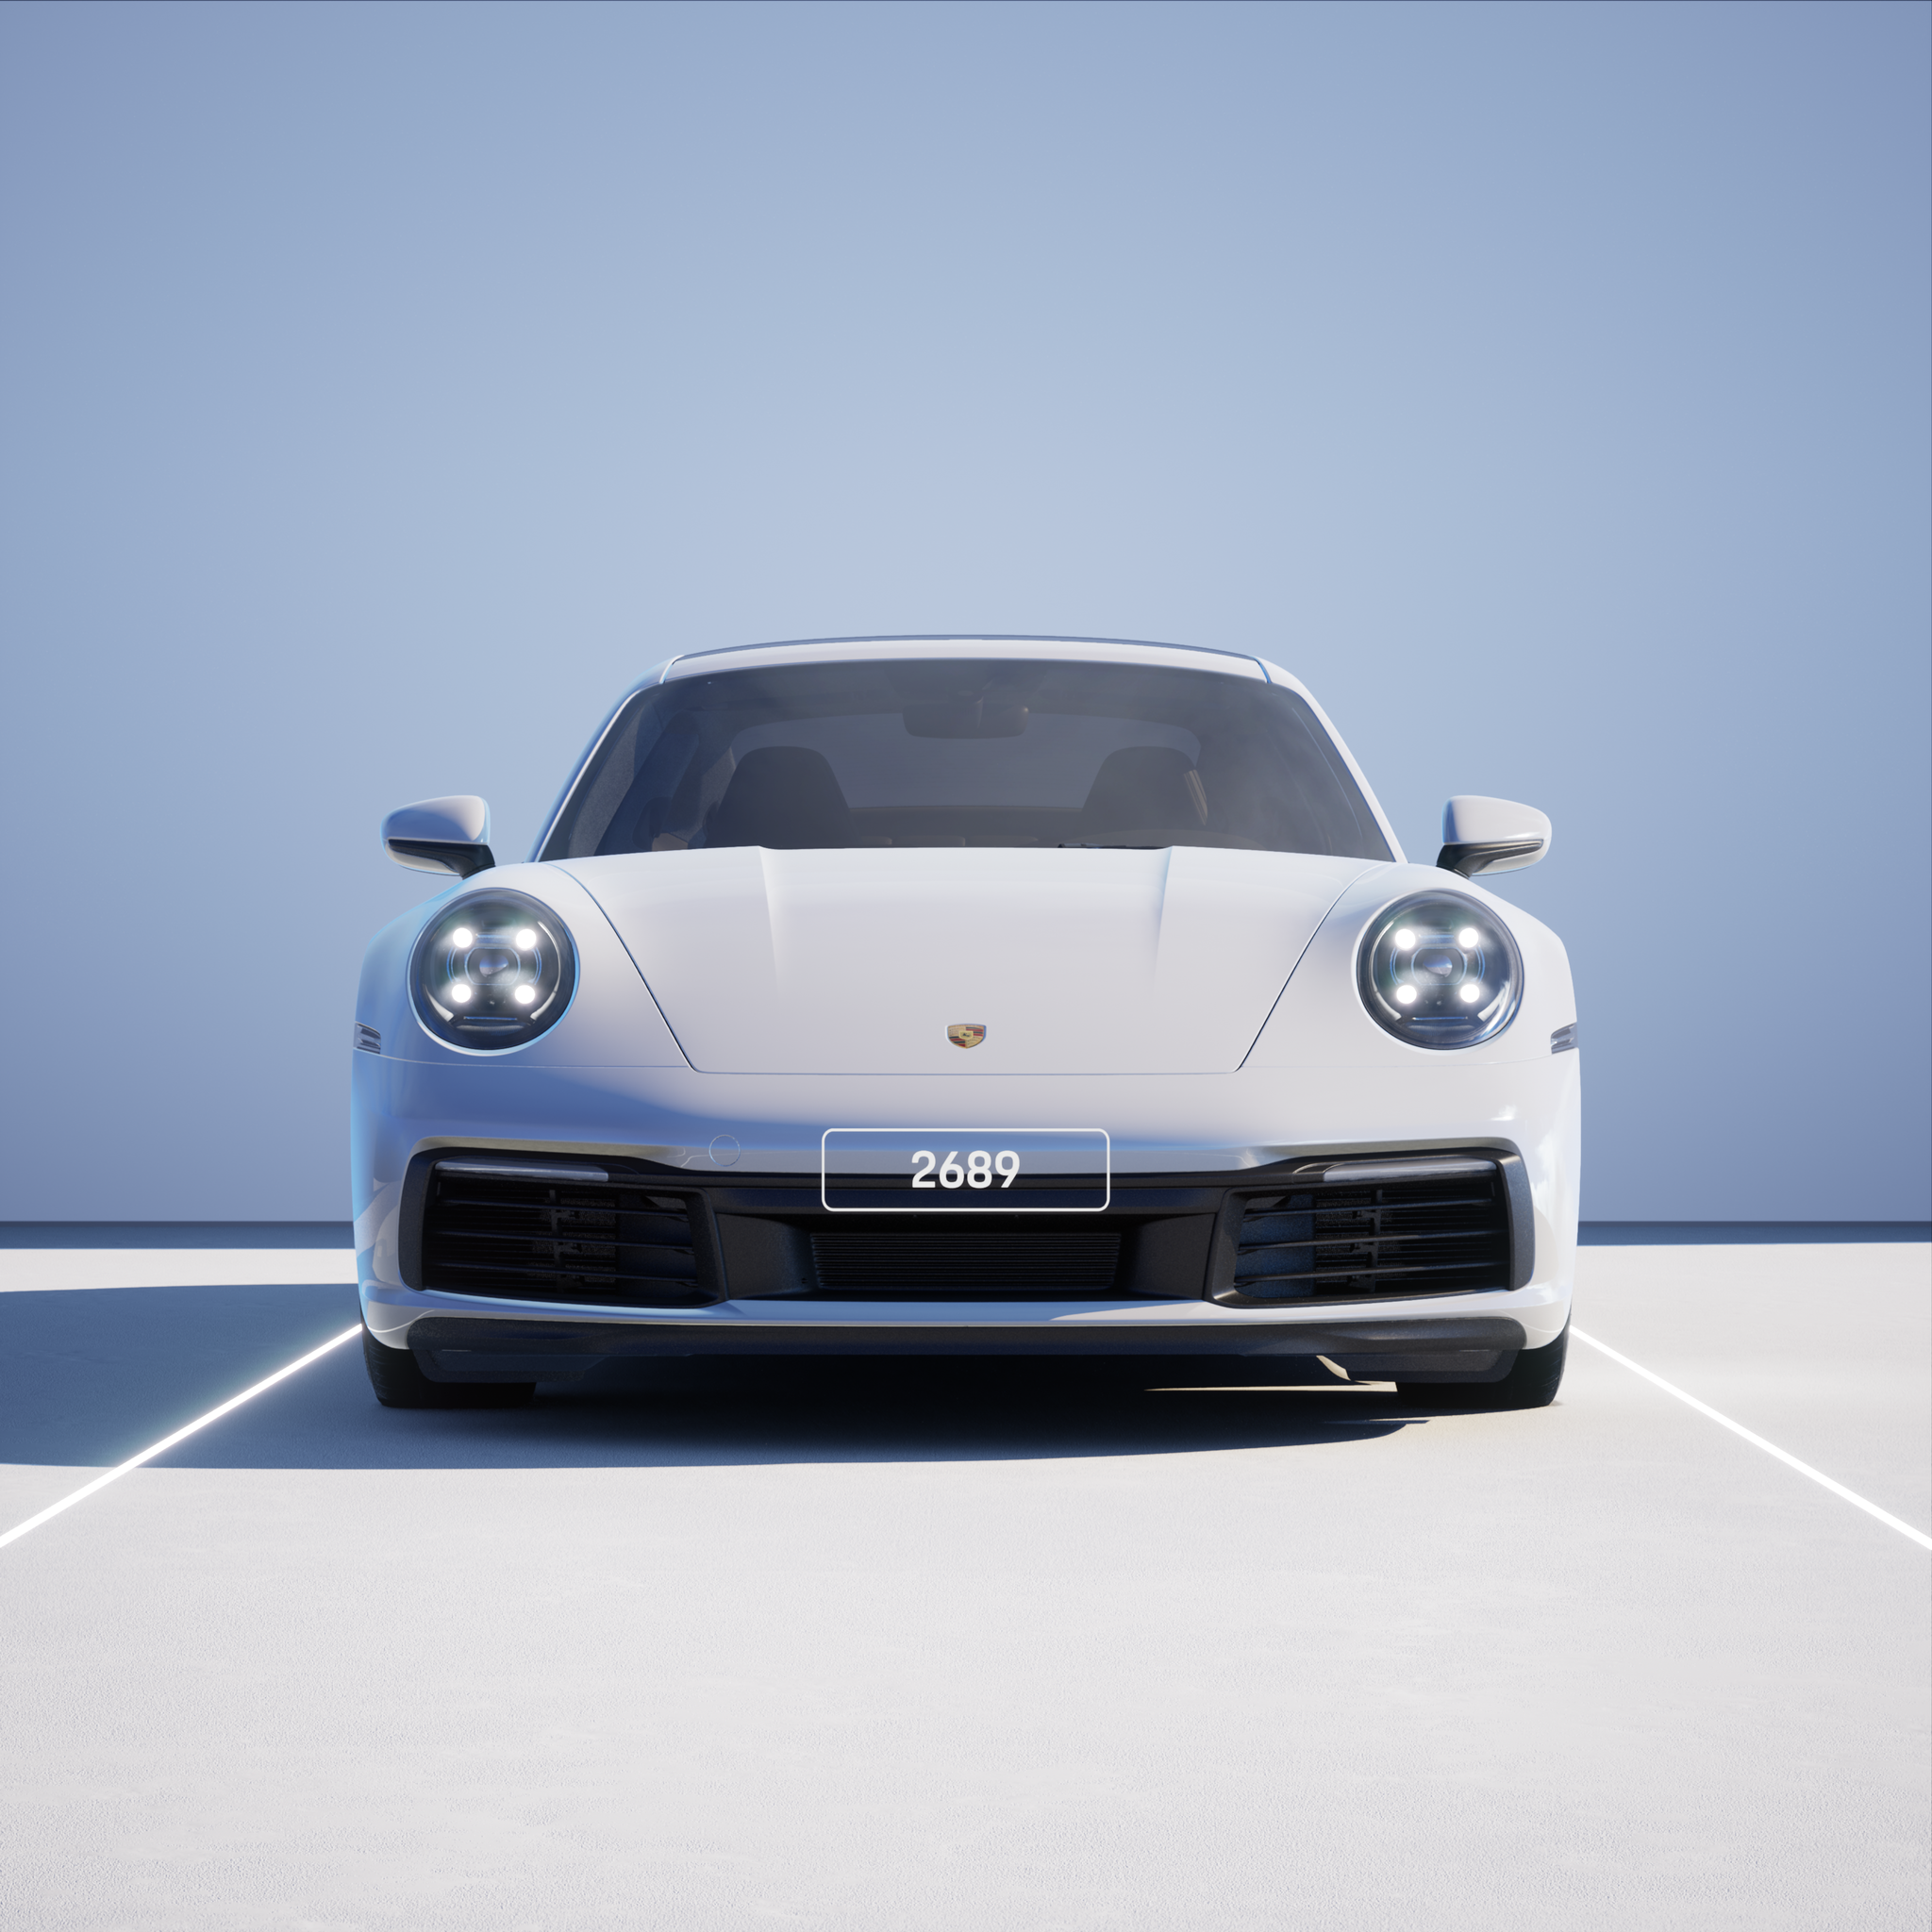 The PORSCHΞ 911 2689 image in phase